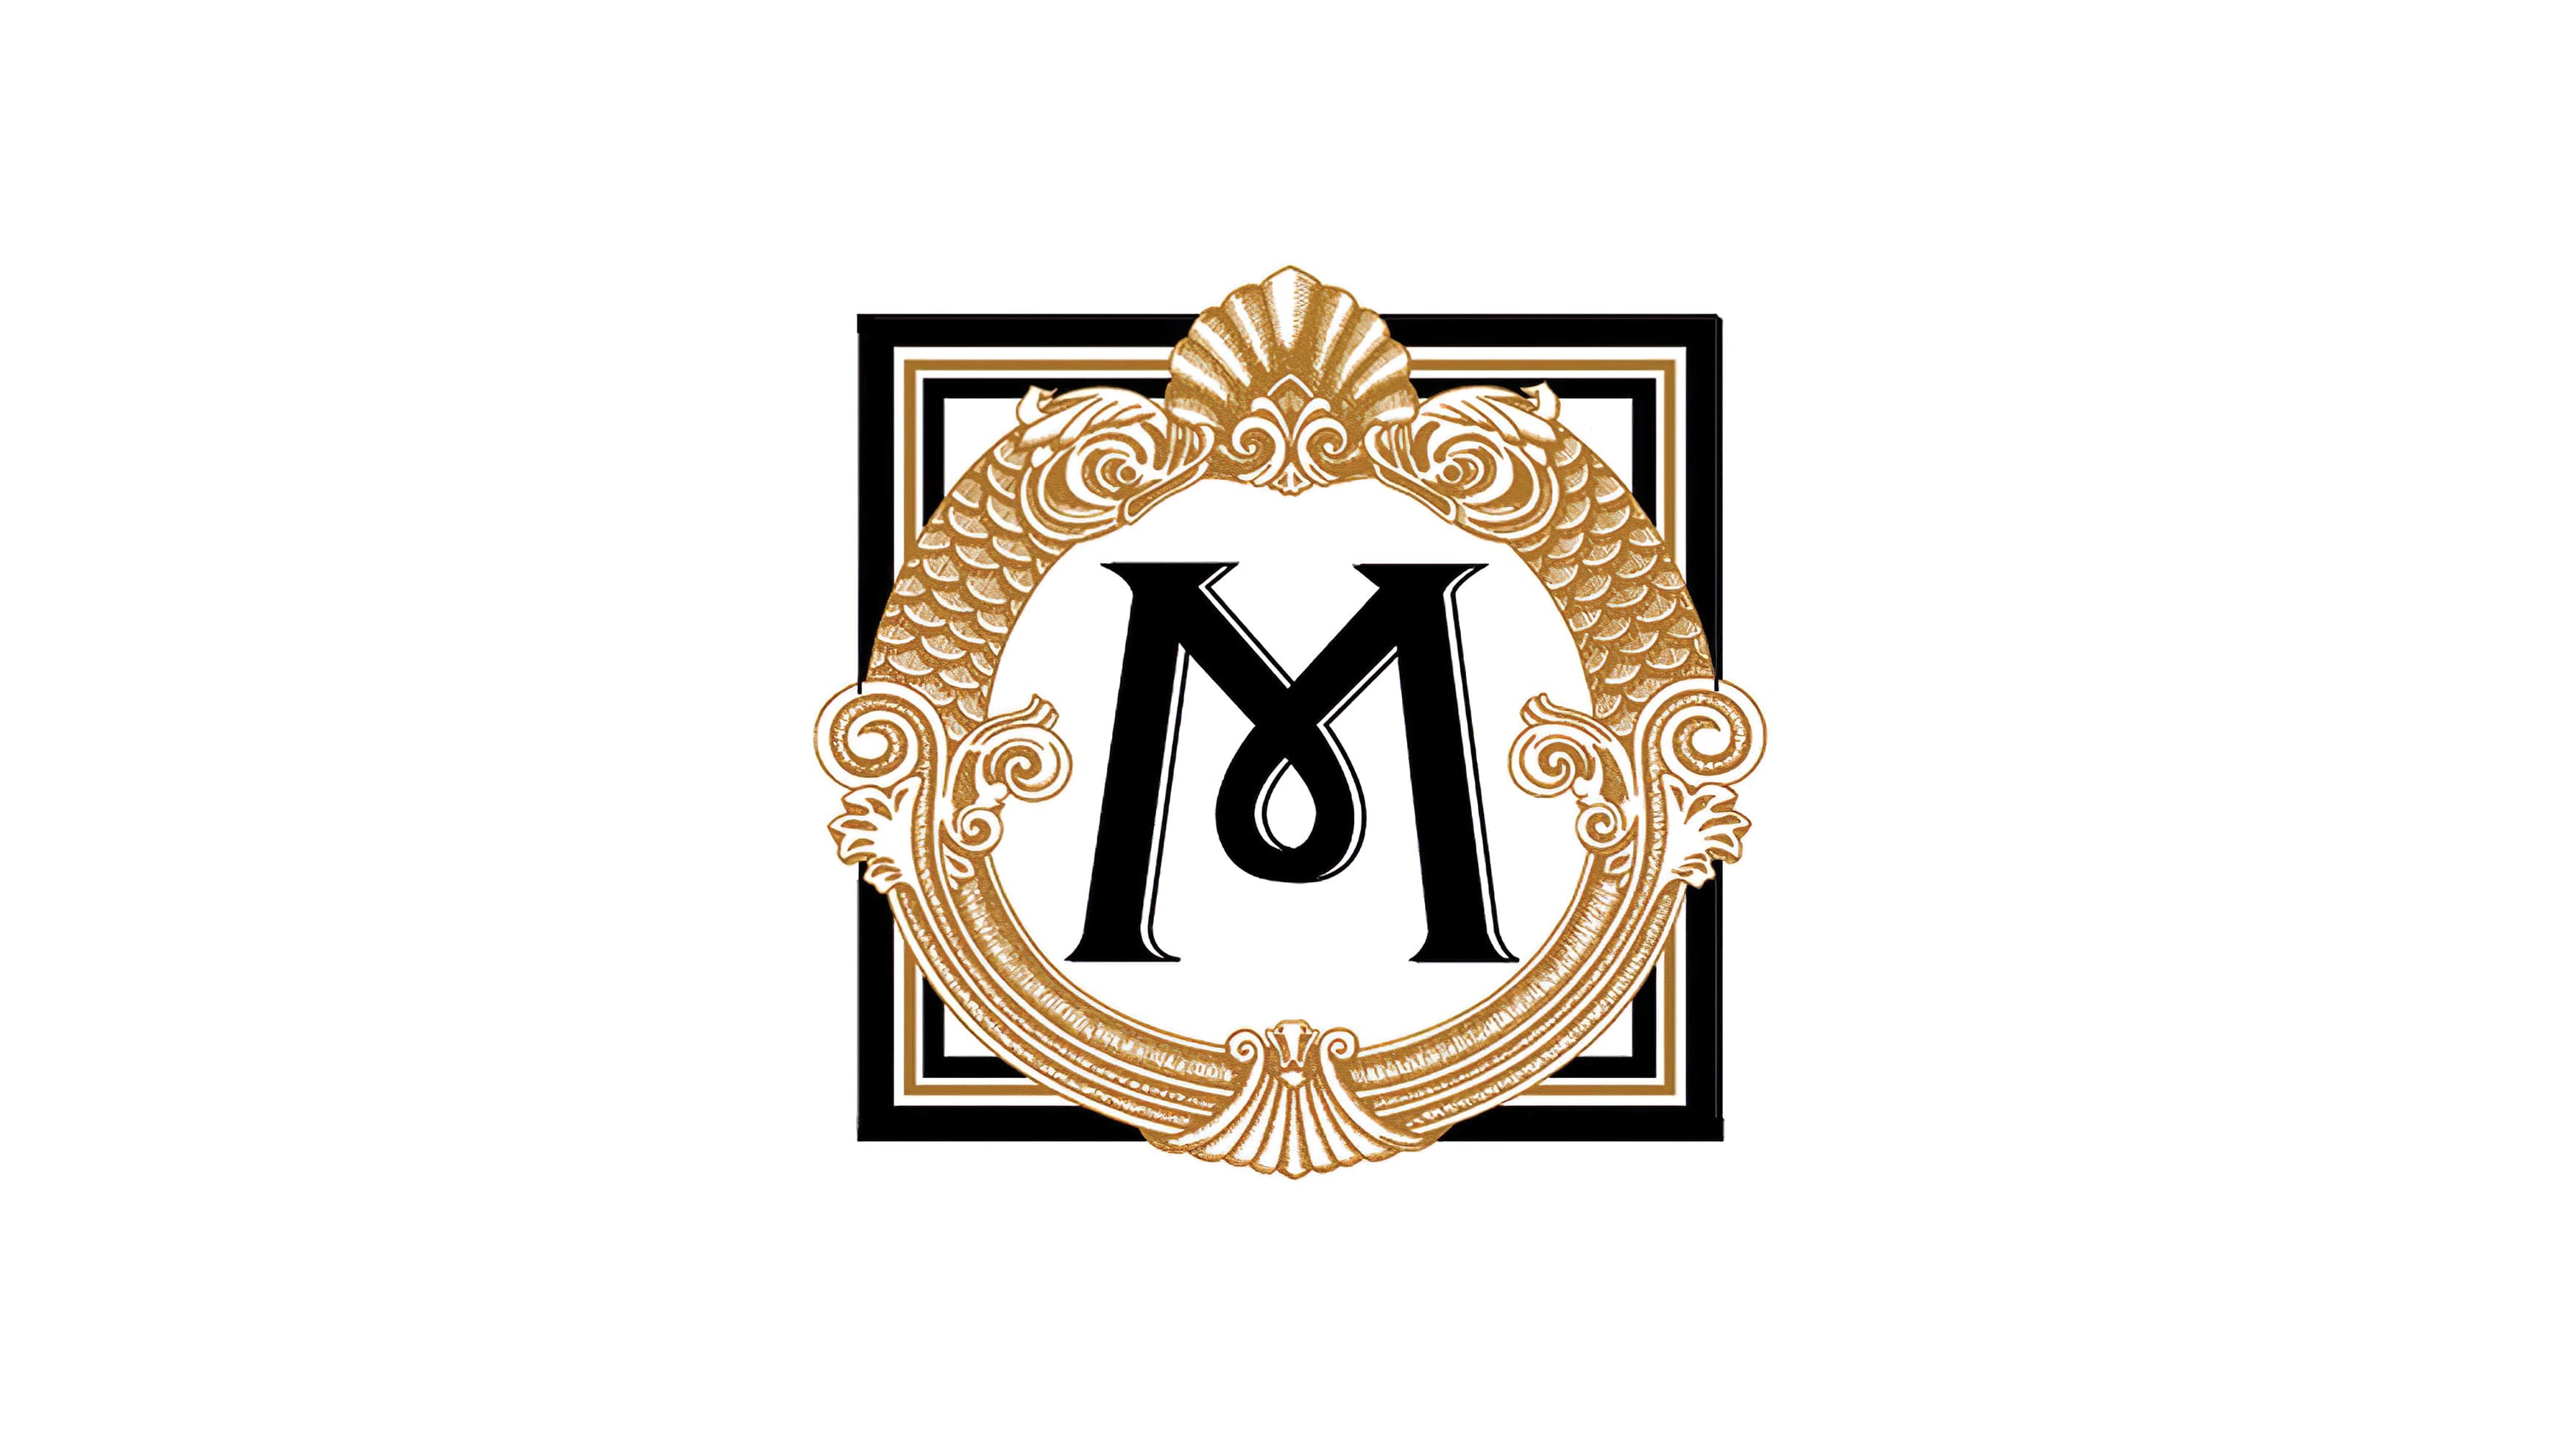 The intricate brand mark designed for the Hotel Miracosta.